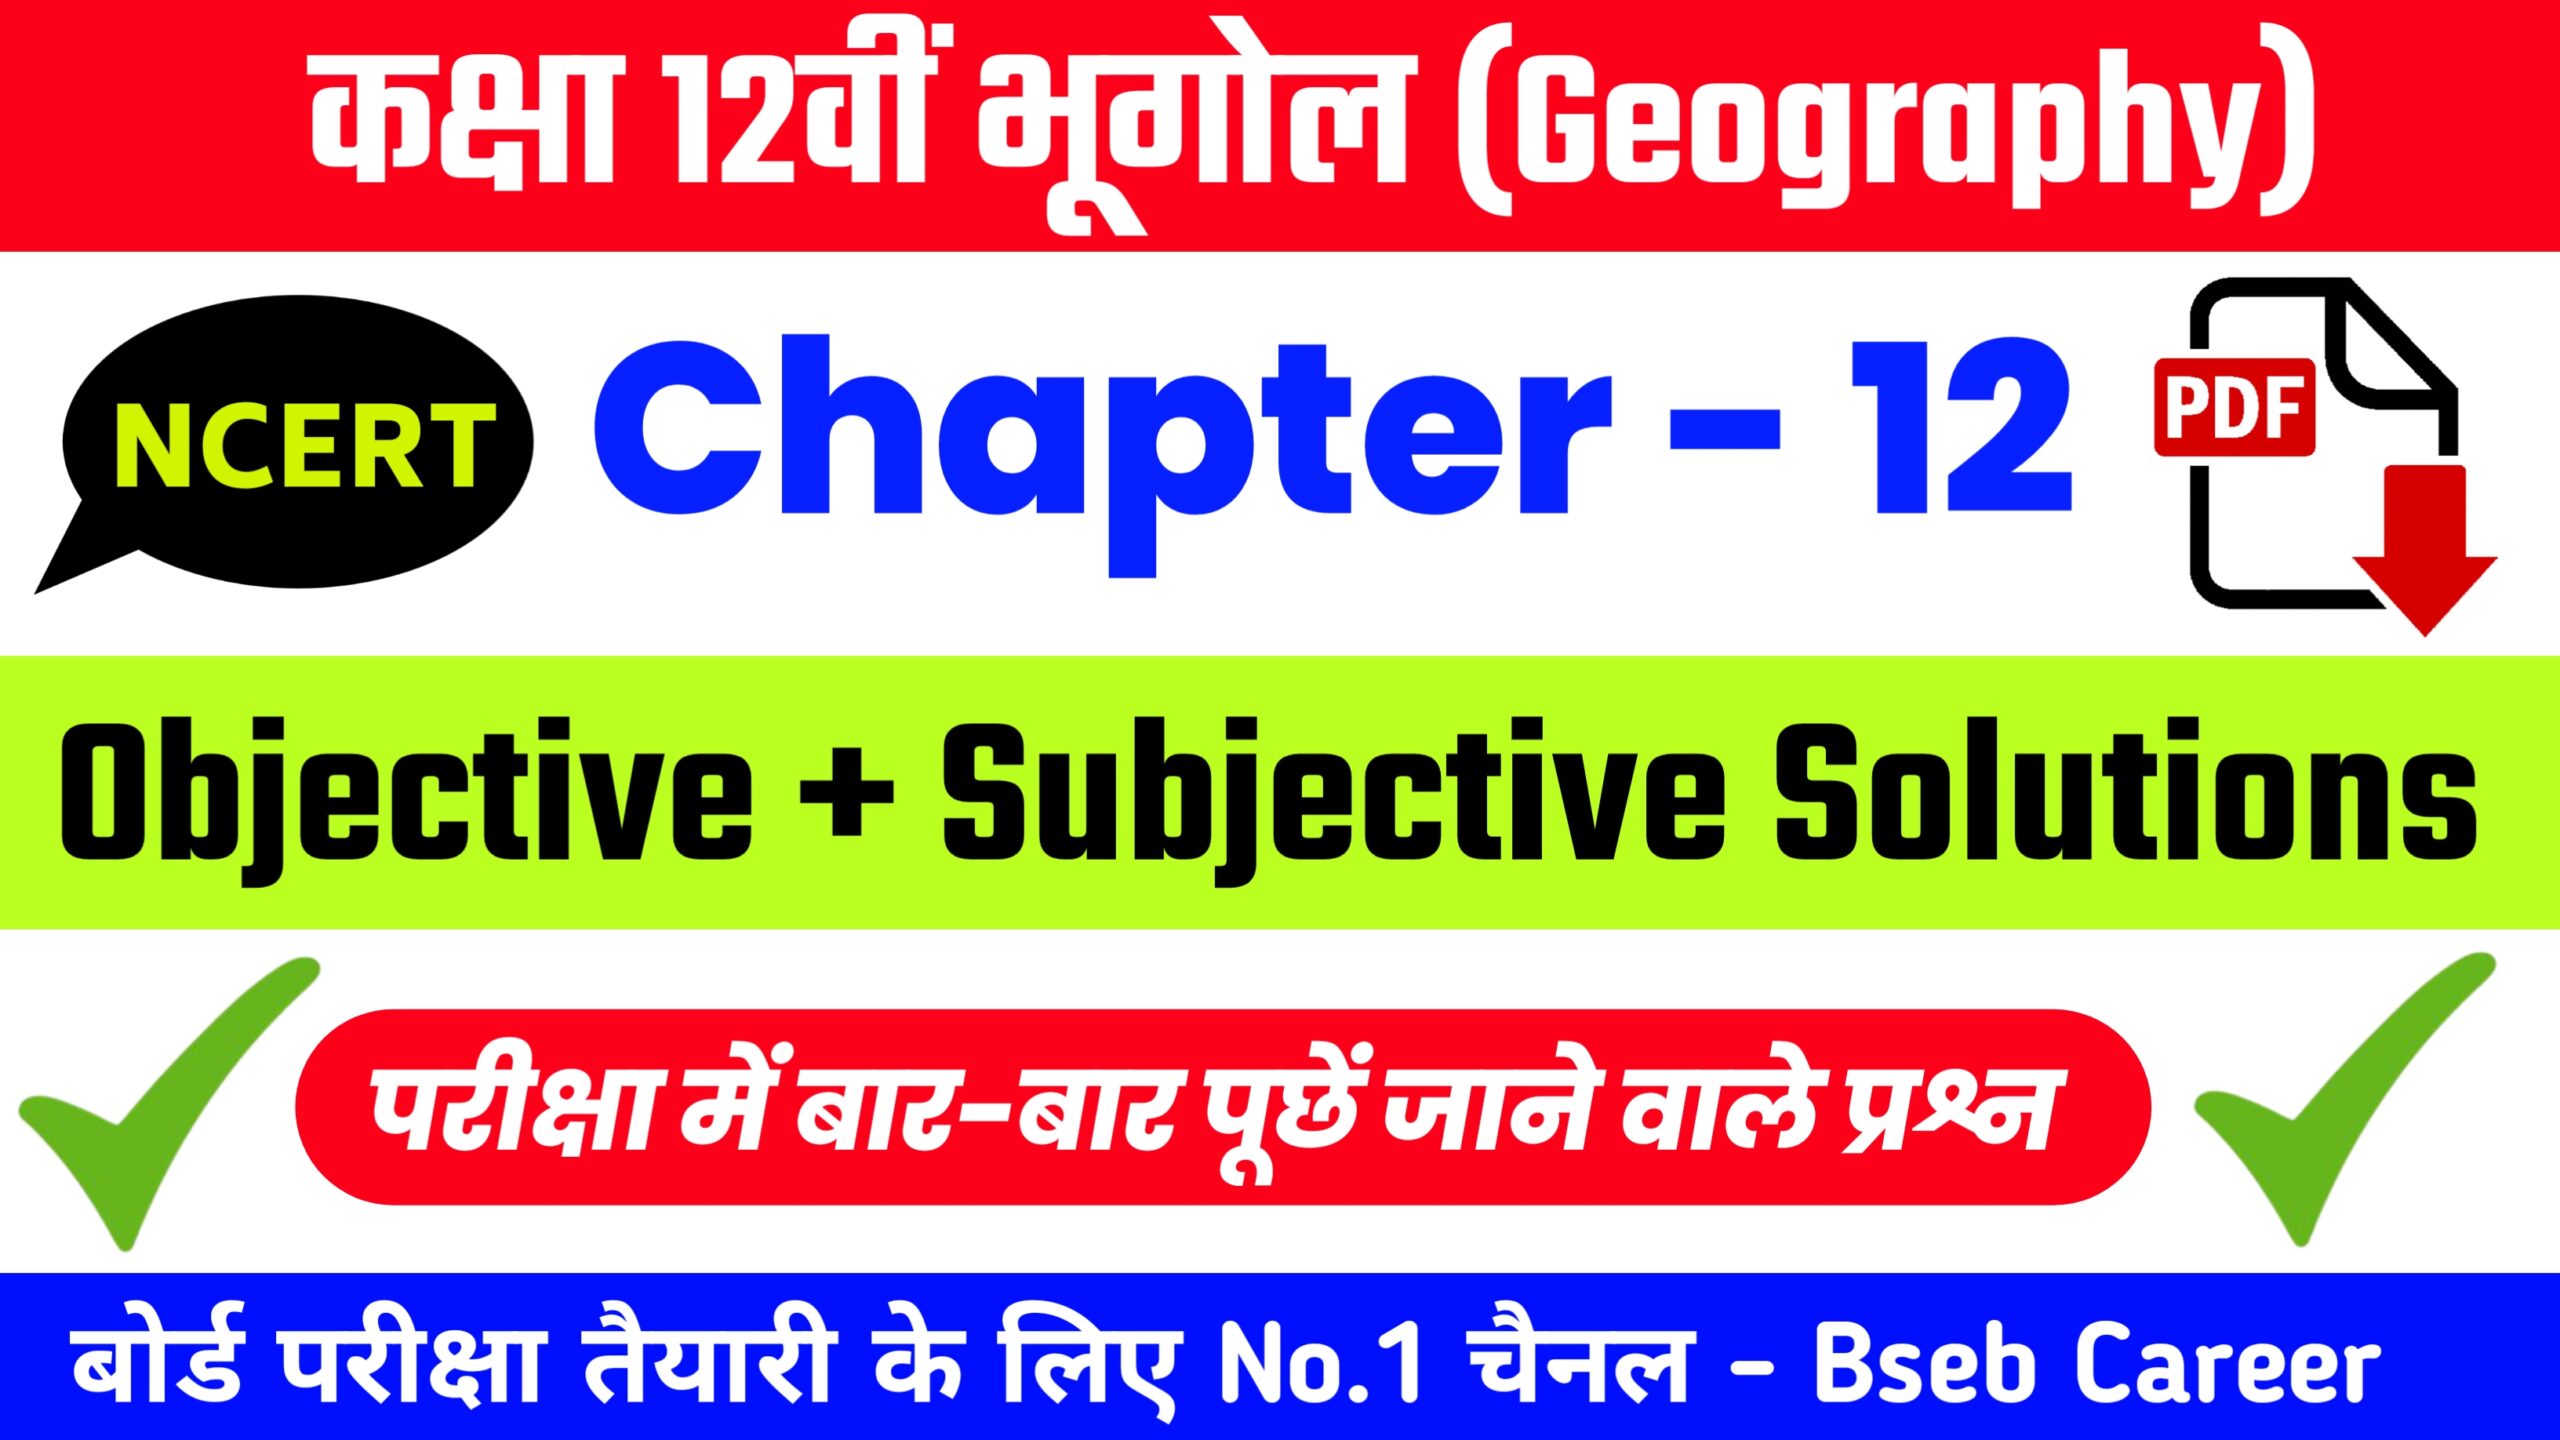 Class 12th Geography Chapter 12